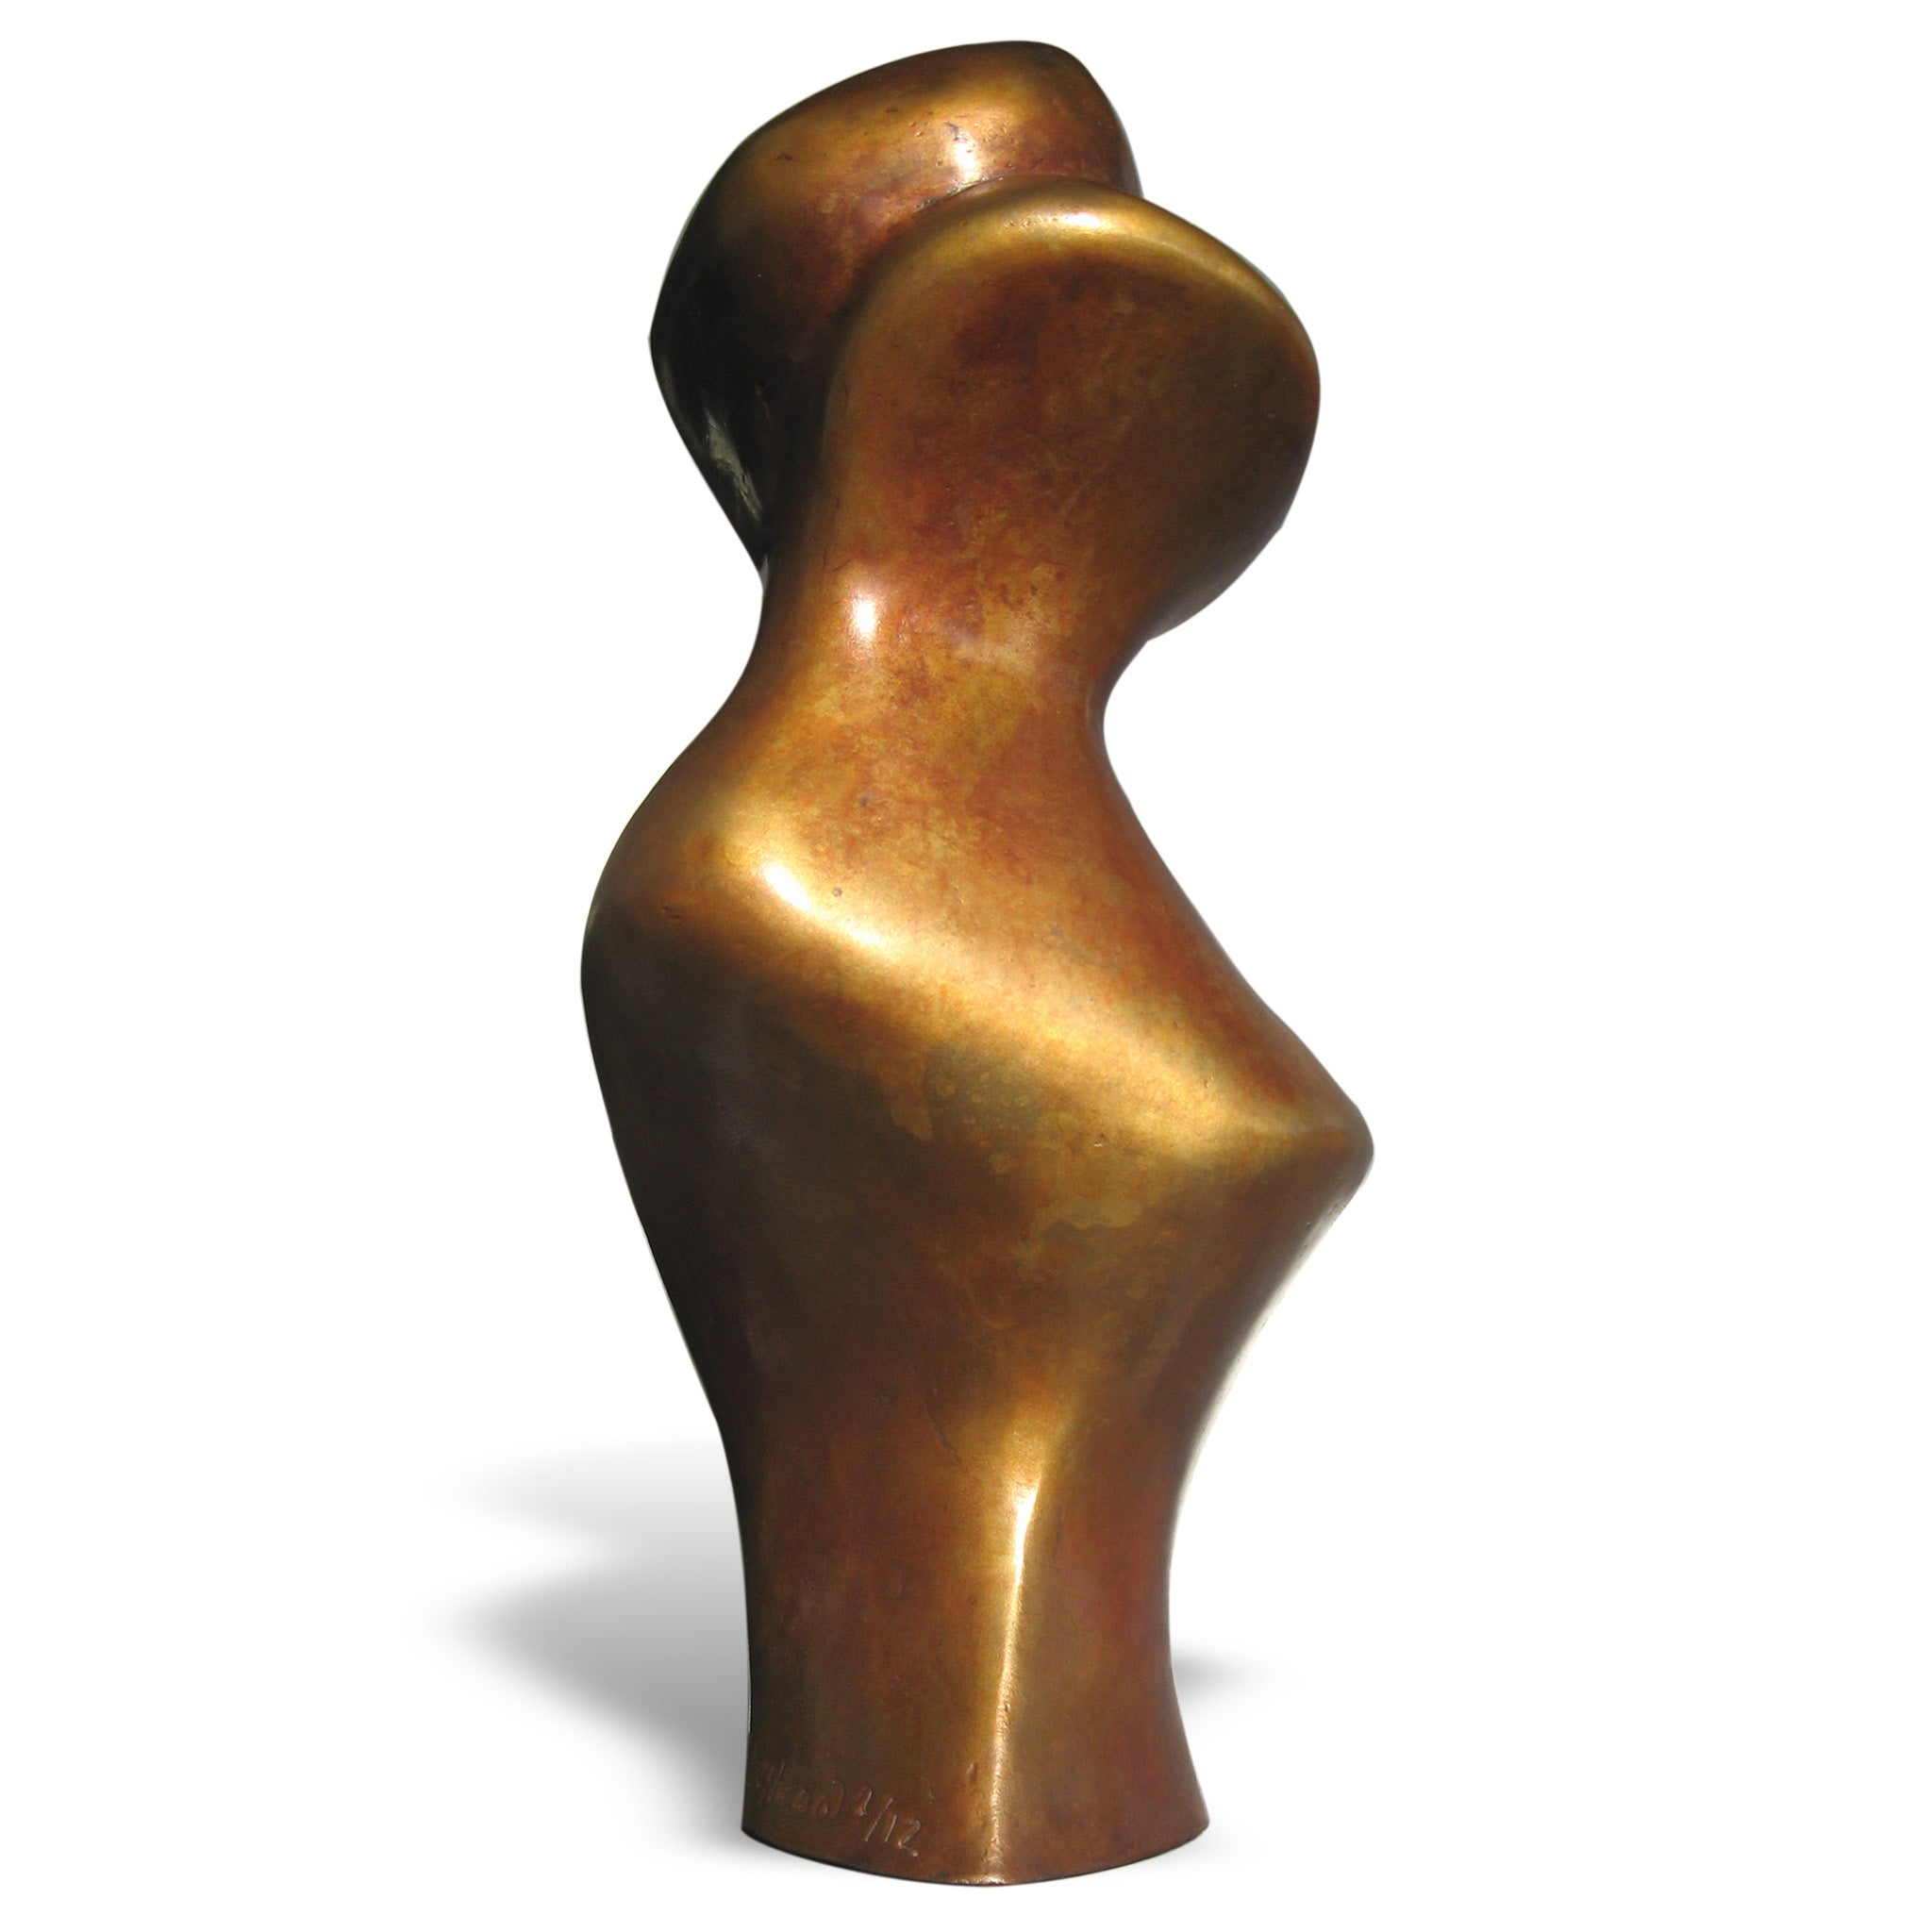 Abstract bronze sculpture by Stephen Williams.